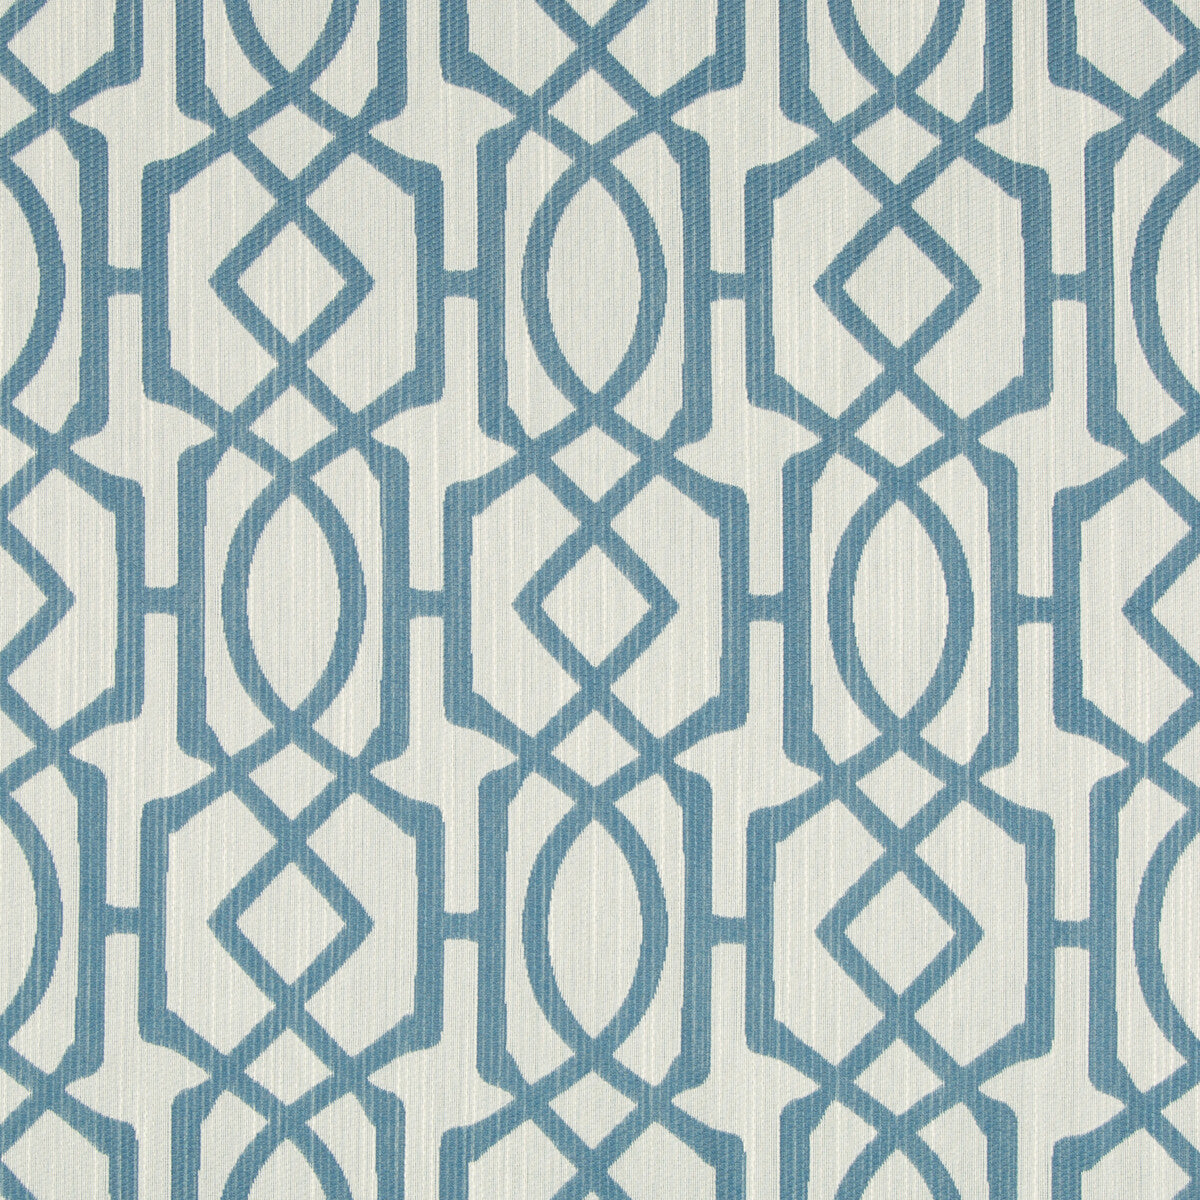 Kravet Contract fabric in 34762-15 color - pattern 34762.15.0 - by Kravet Contract in the Crypton Incase collection